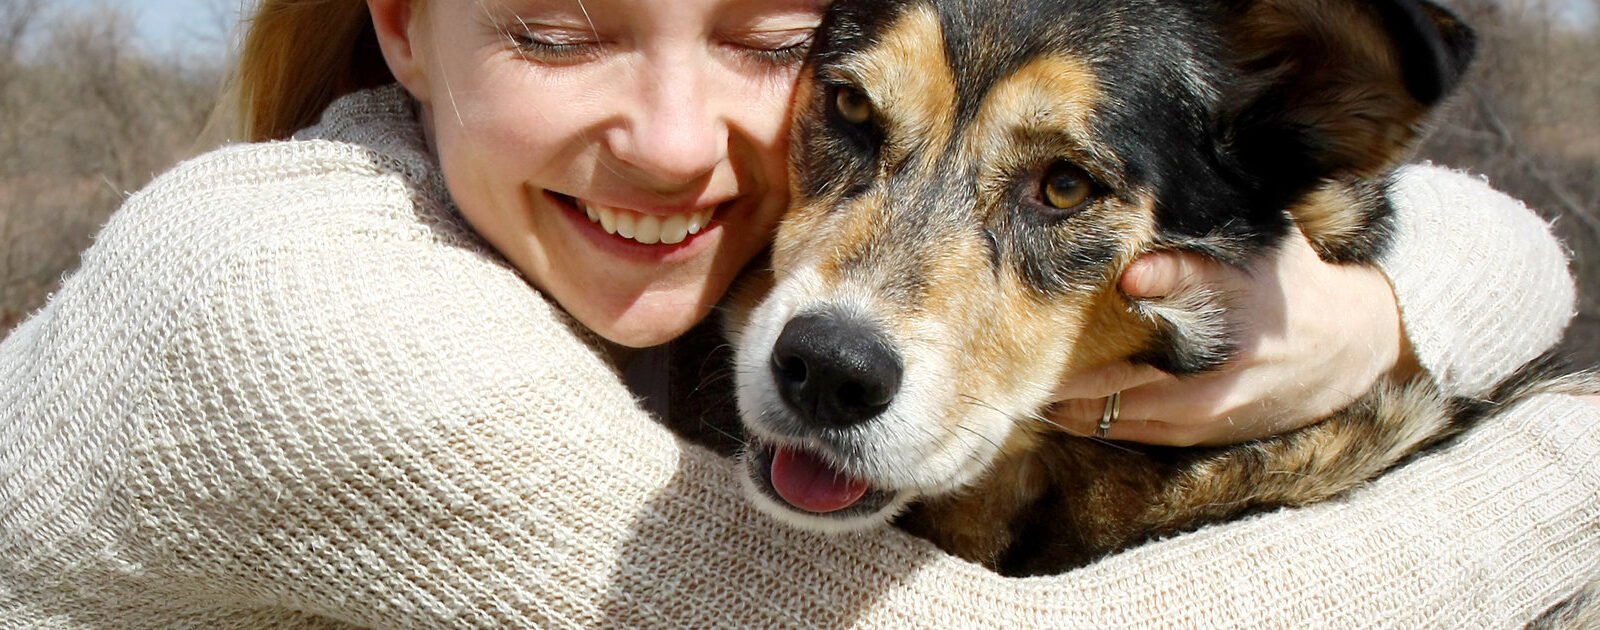 Woman hugs dog in close up. How to get a rescue dog.